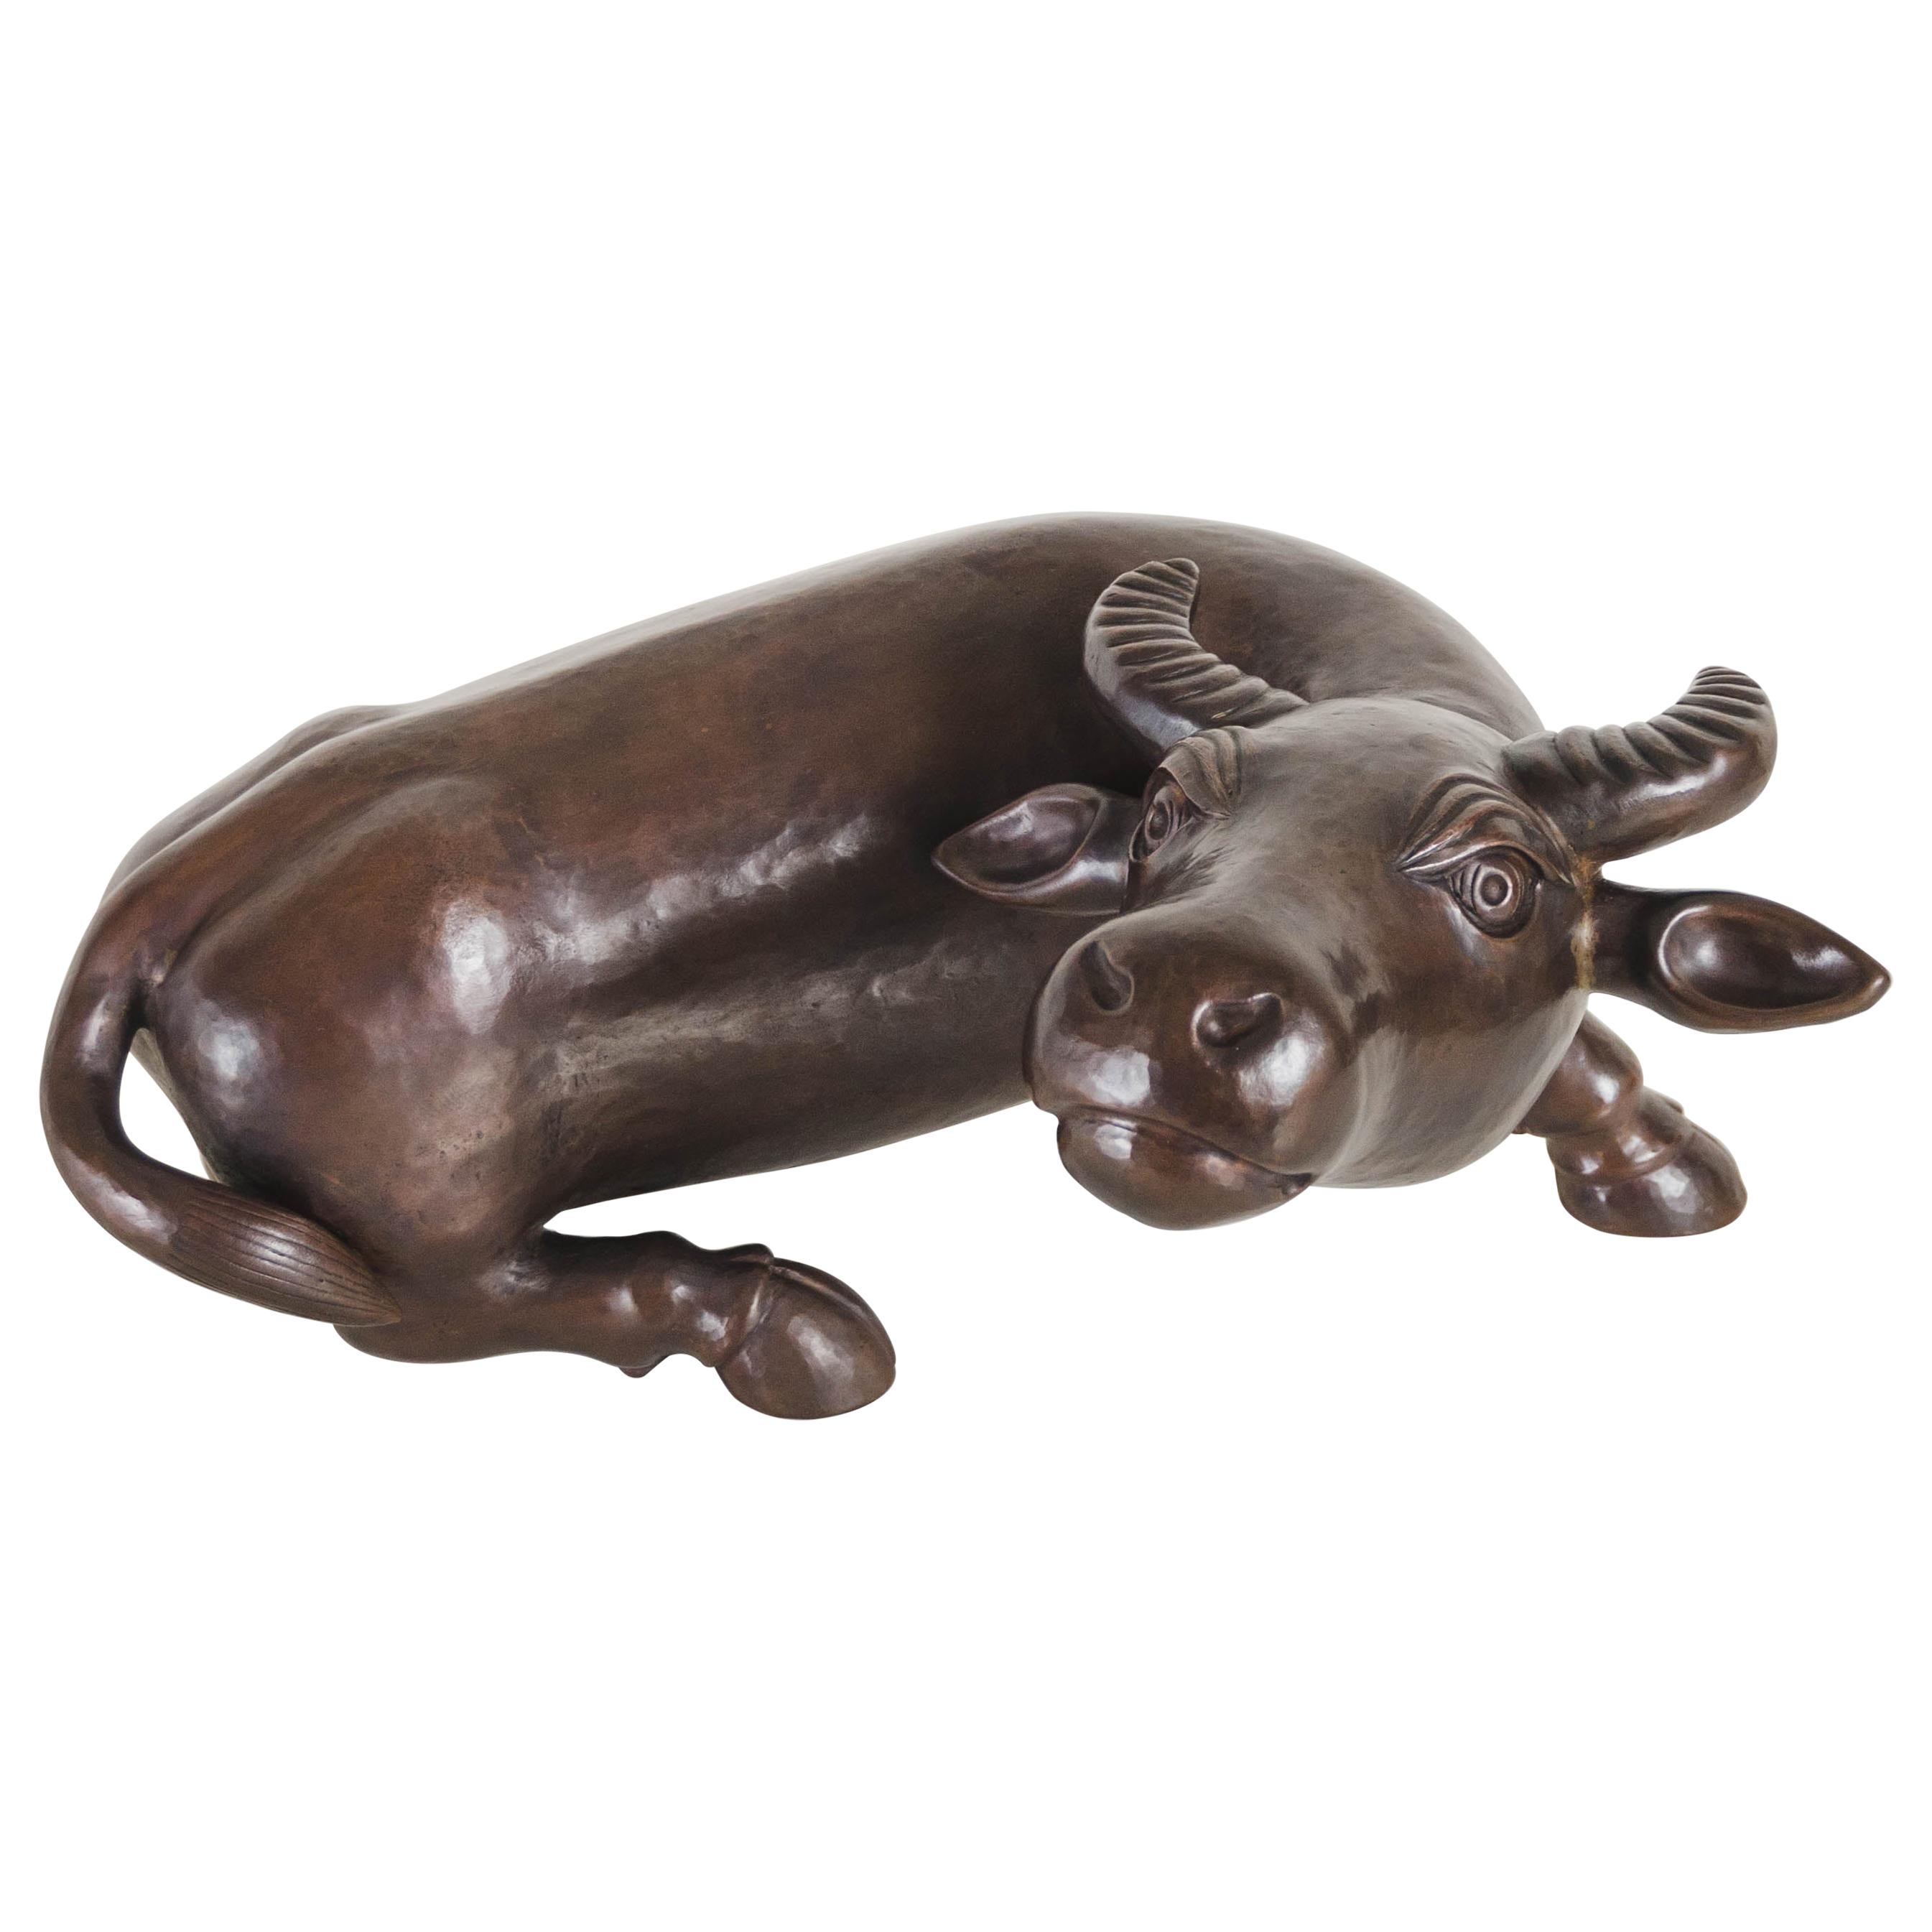 Contemporary Hand Repoussé Water Ox Sculpture in Antique Copper by Robert Kuo